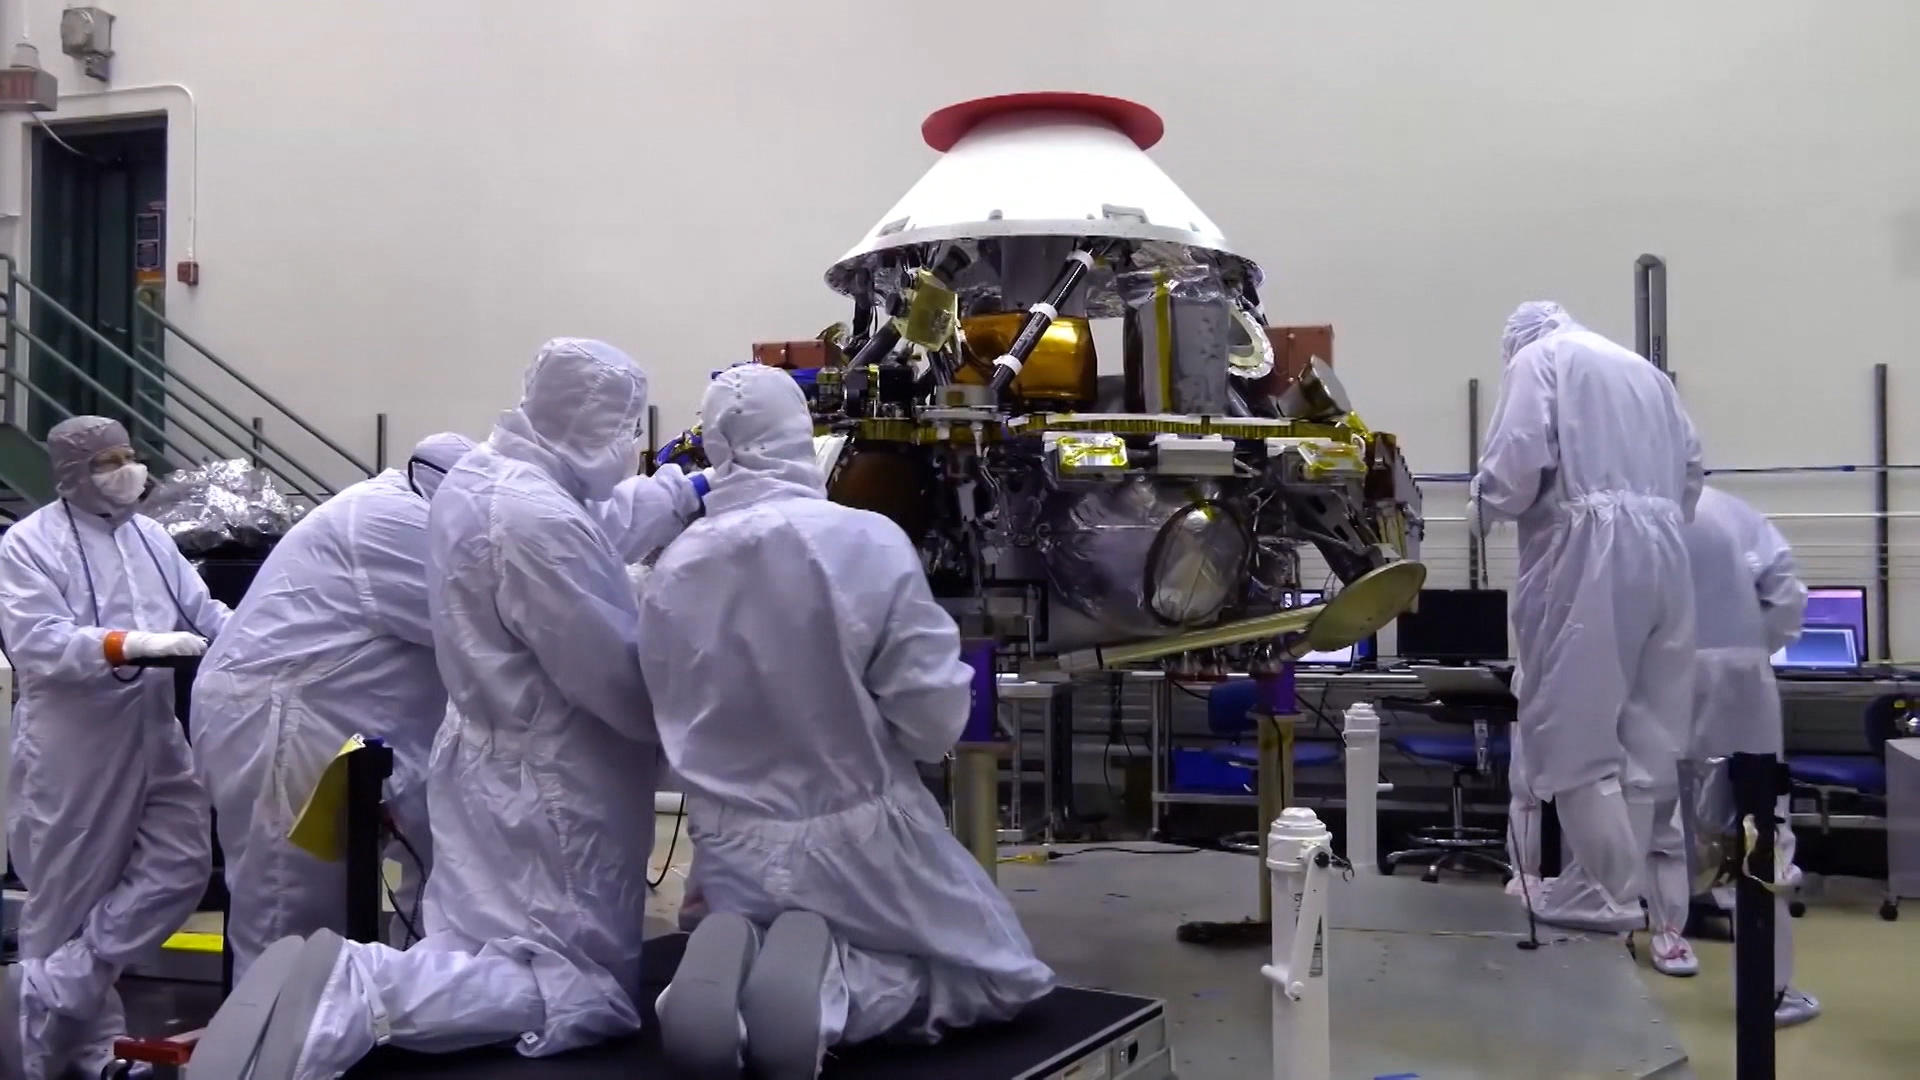 The InSight probe being inspected